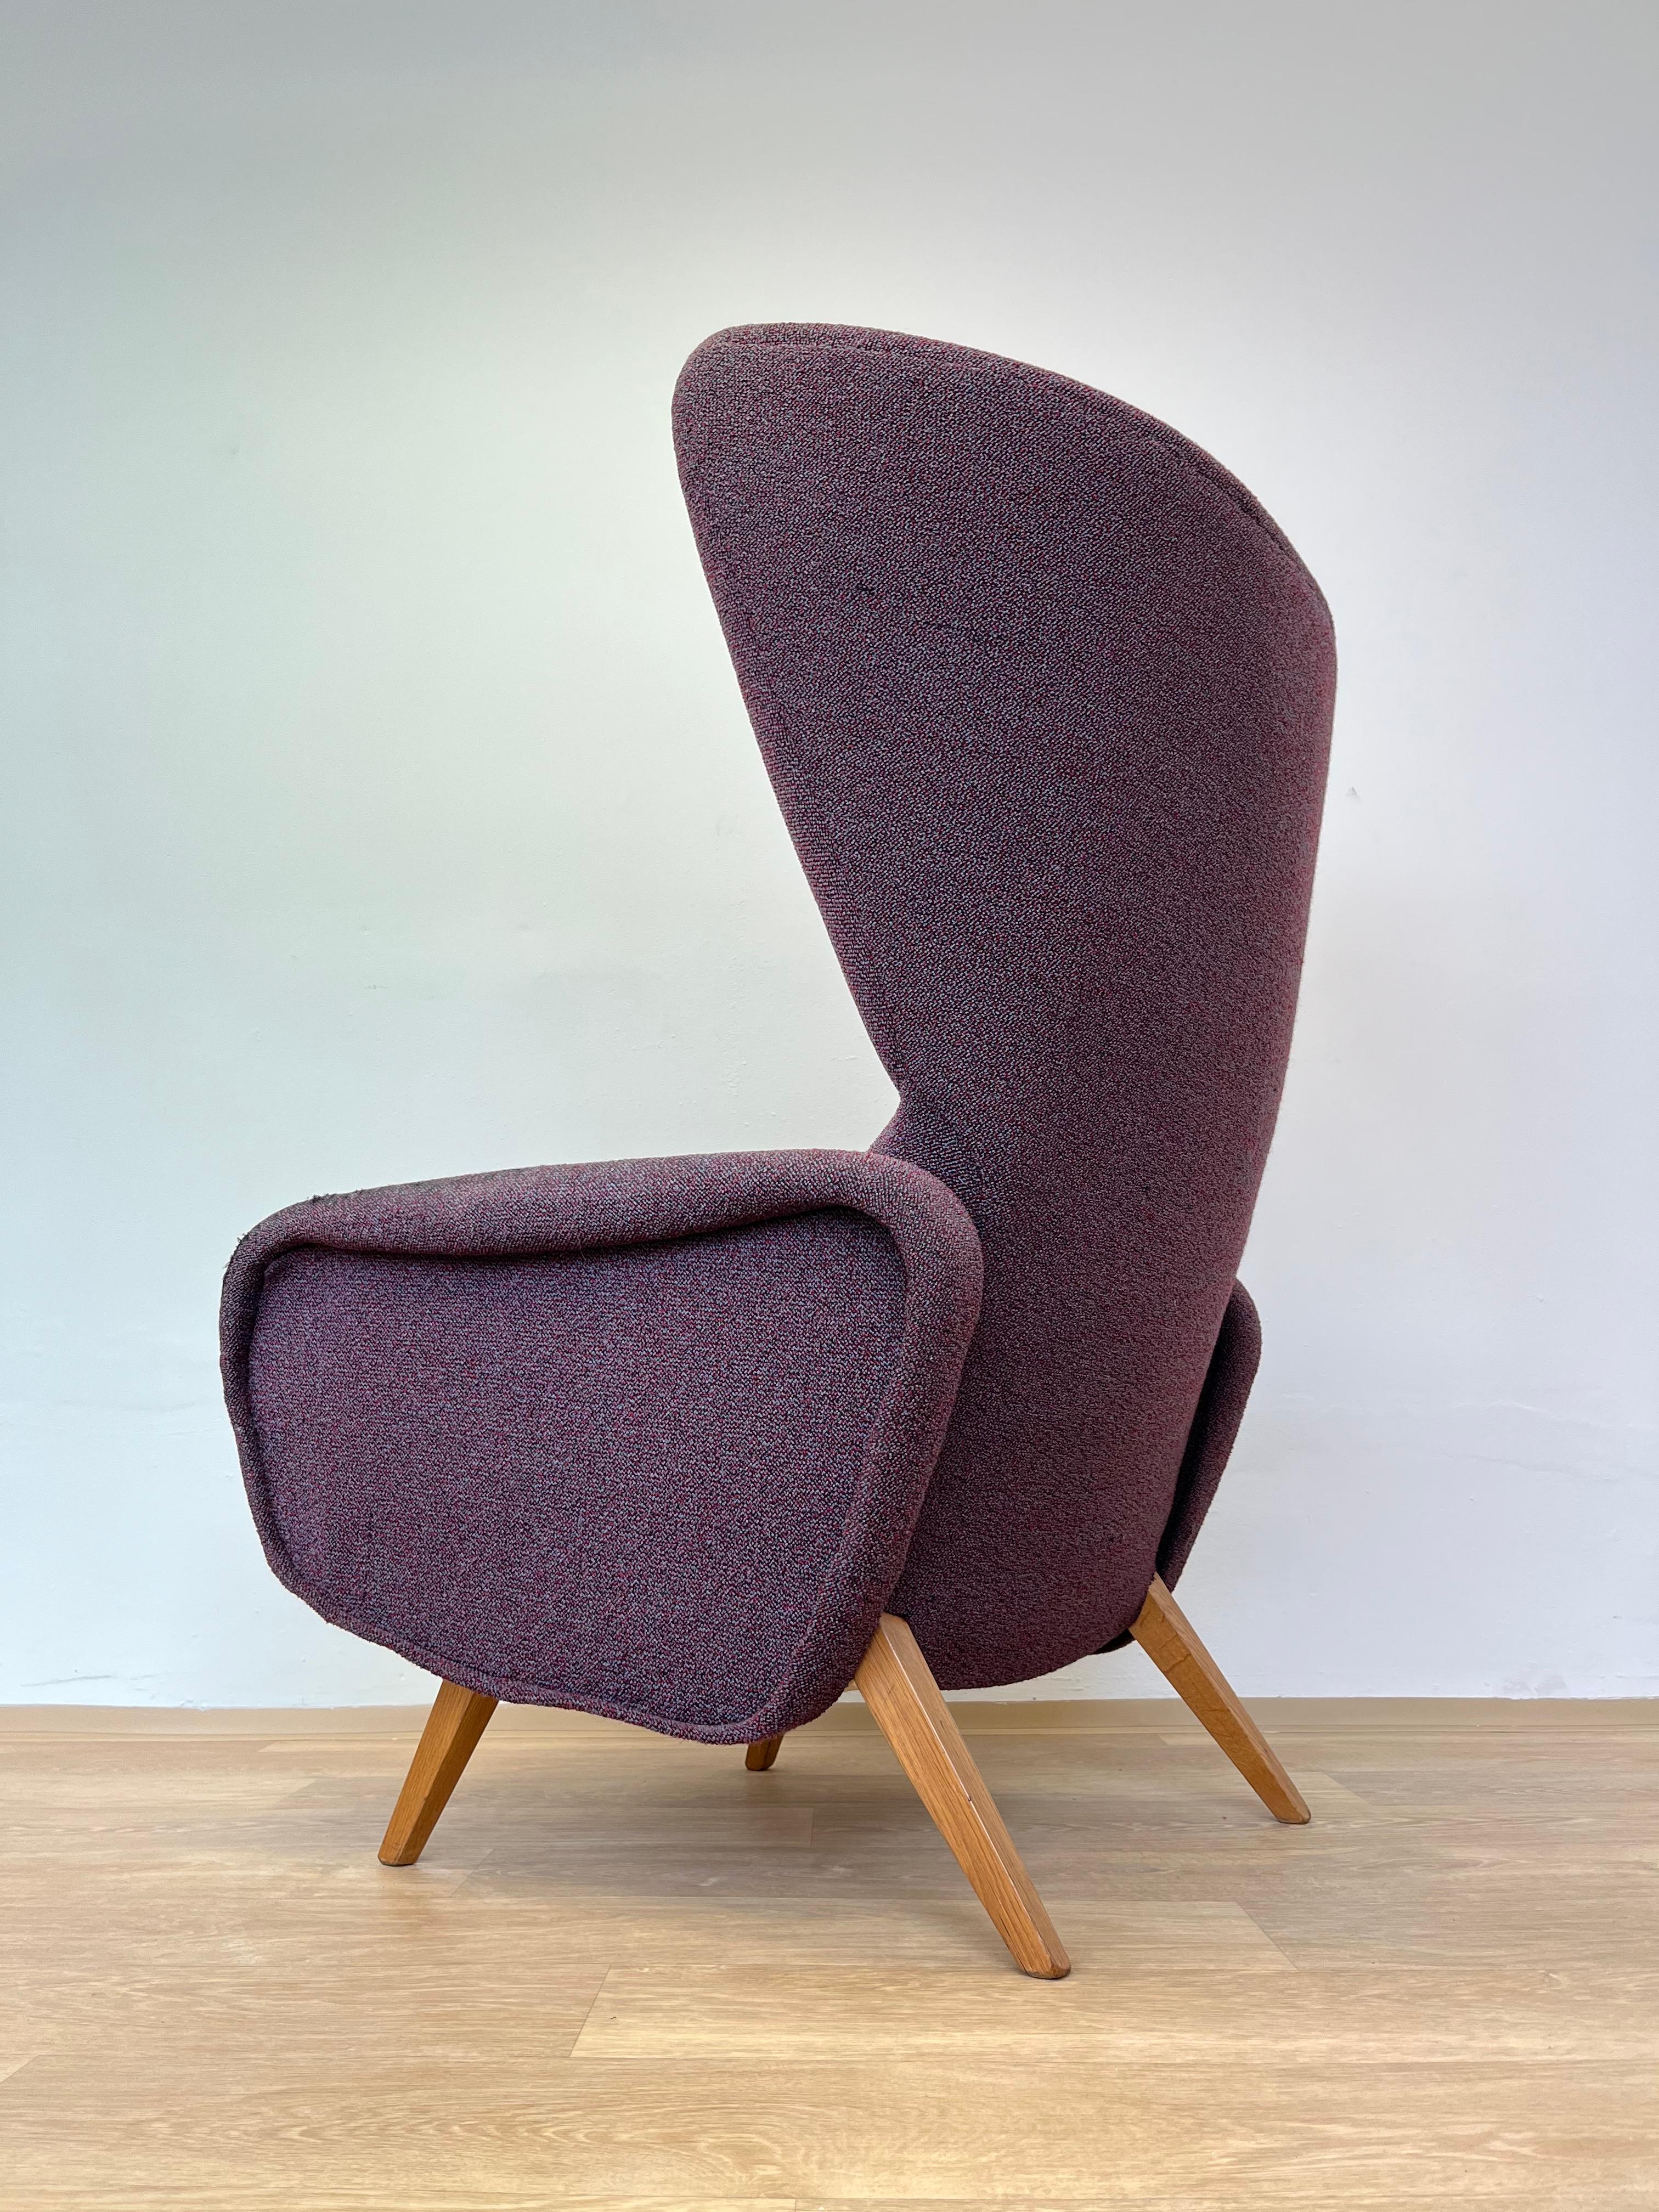 1970s
massive and beautiful design
solid, suitable for a new upholstery
original condition.